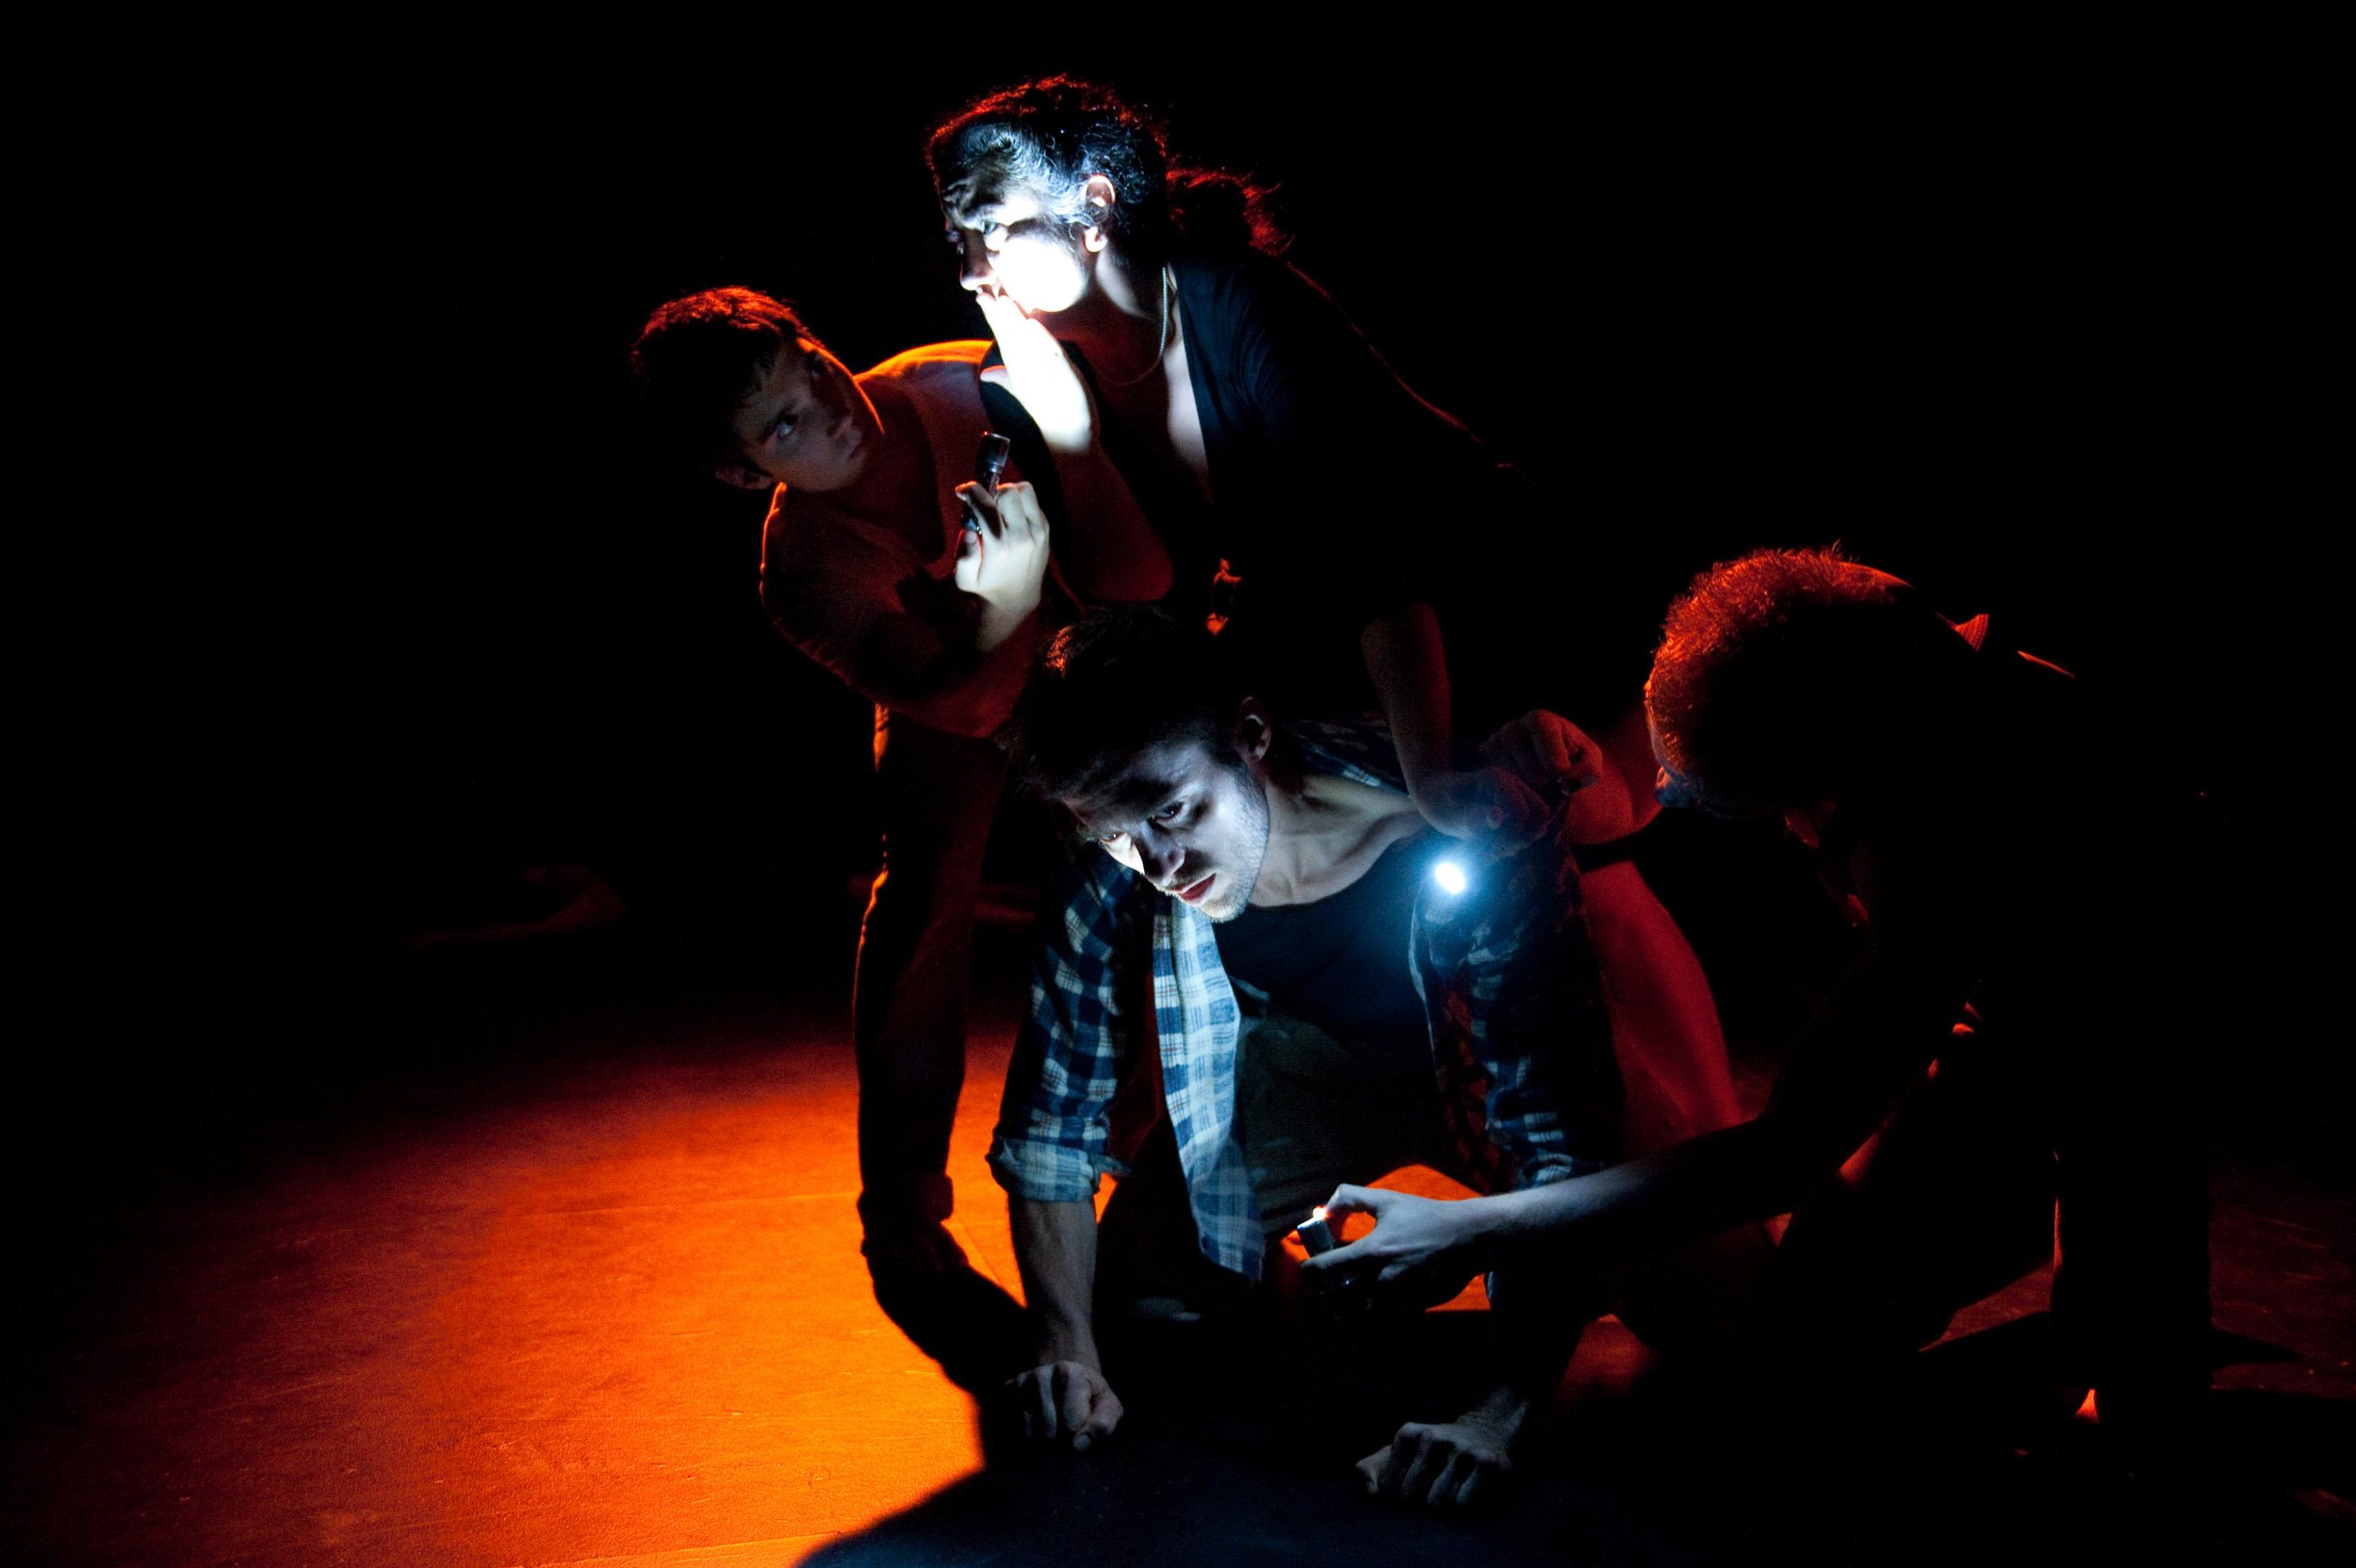  ‘Beneath the Floorboards’, Company White Wolf, Union House Theatre, 2011. 